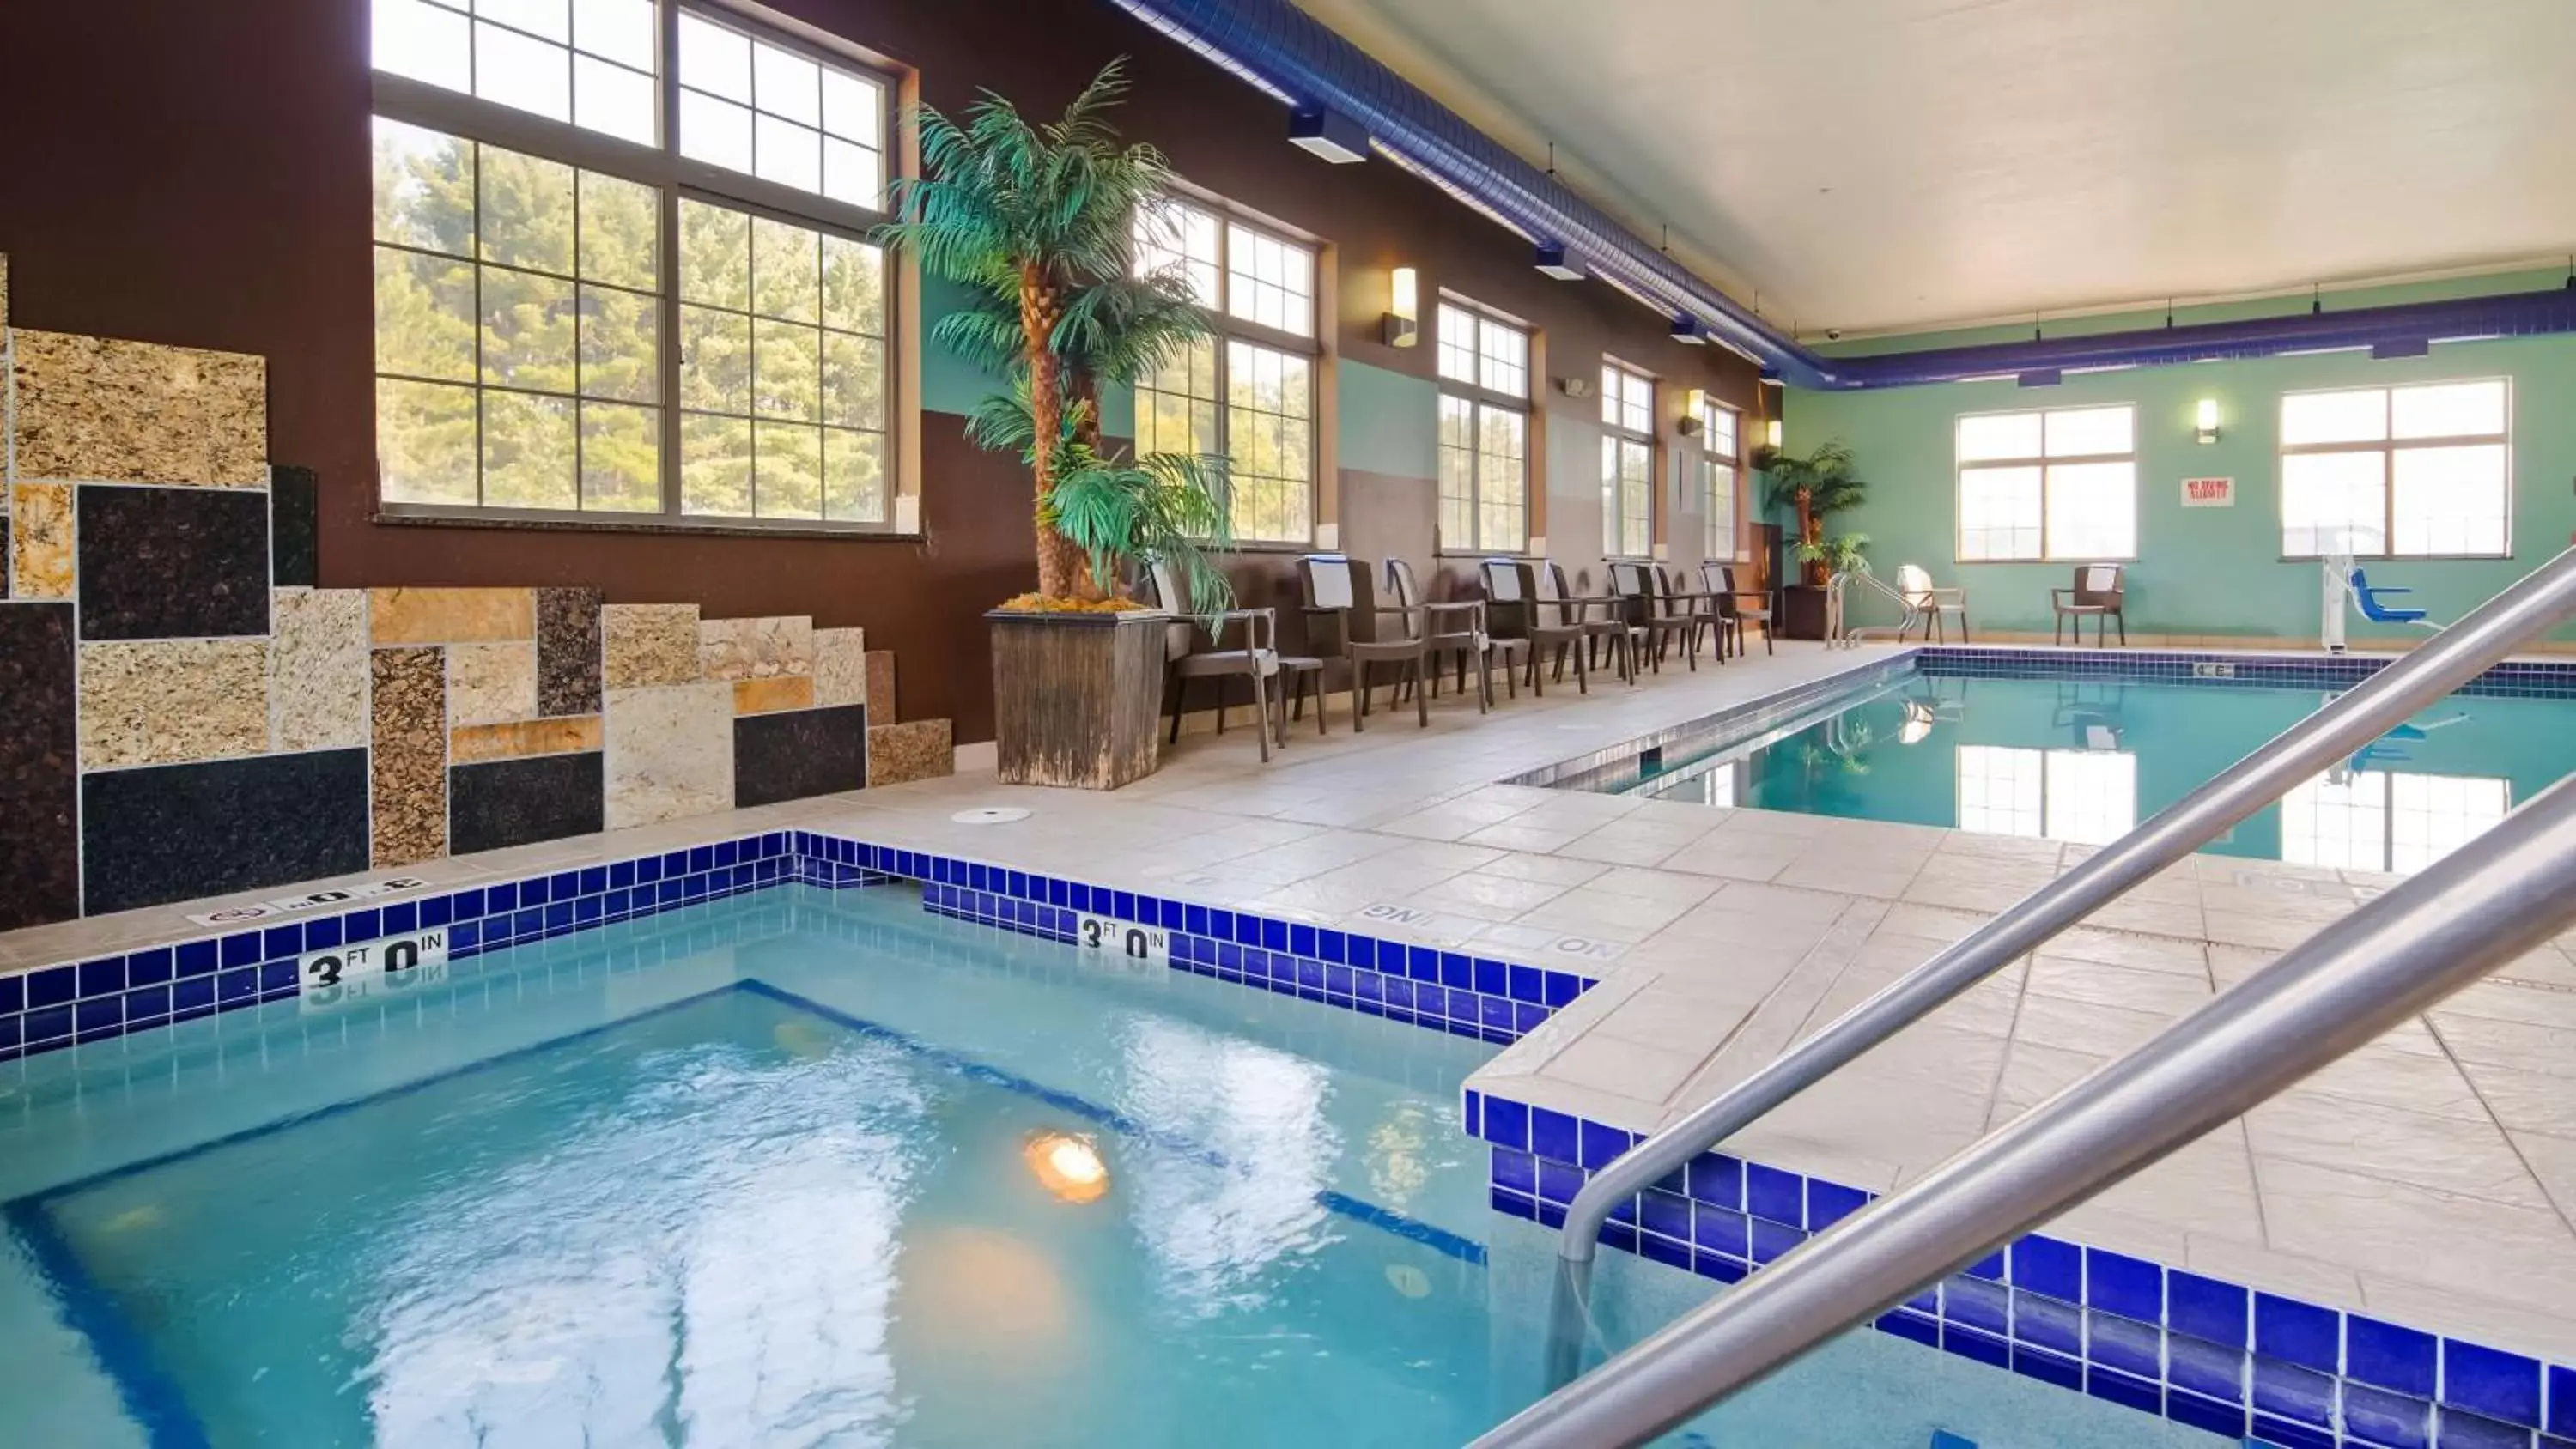 On site, Swimming Pool in Best Western Plover-Stevens Point Hotel & Conference Center